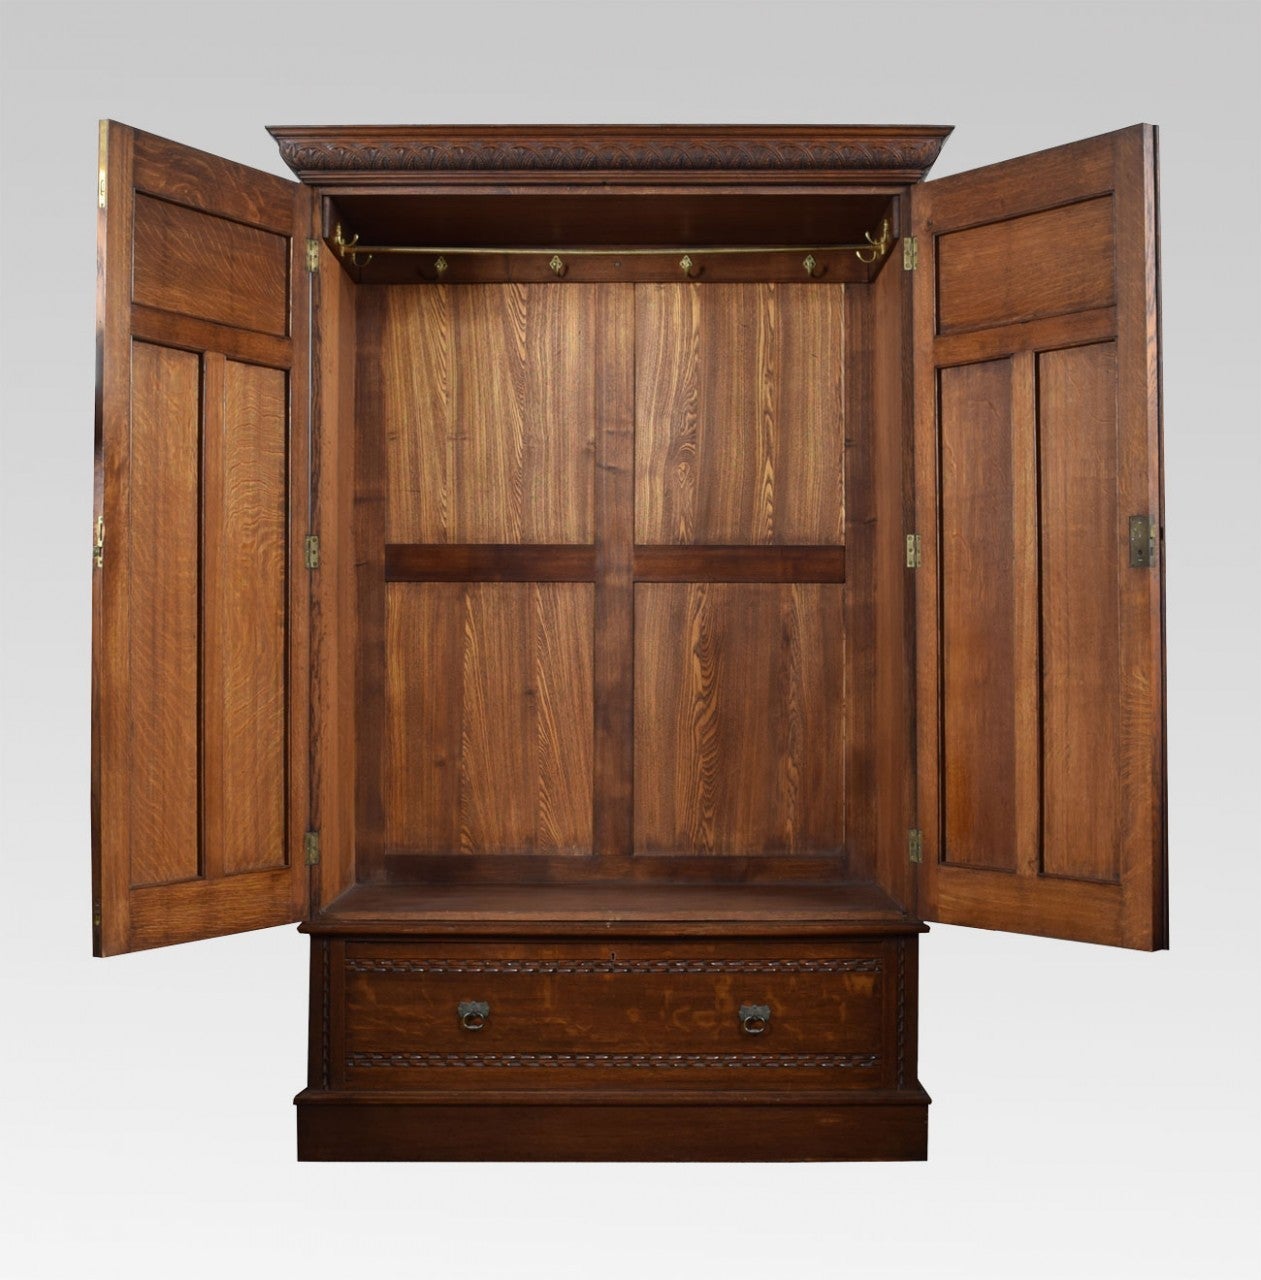 Oak two door wardrobe the acanthus carved cornice above two large oak panelled doors opening to reveal large hanging area the base fitted with single draw having brass tooled  handles  all raised up on plinth base

Dimensions: Height 79